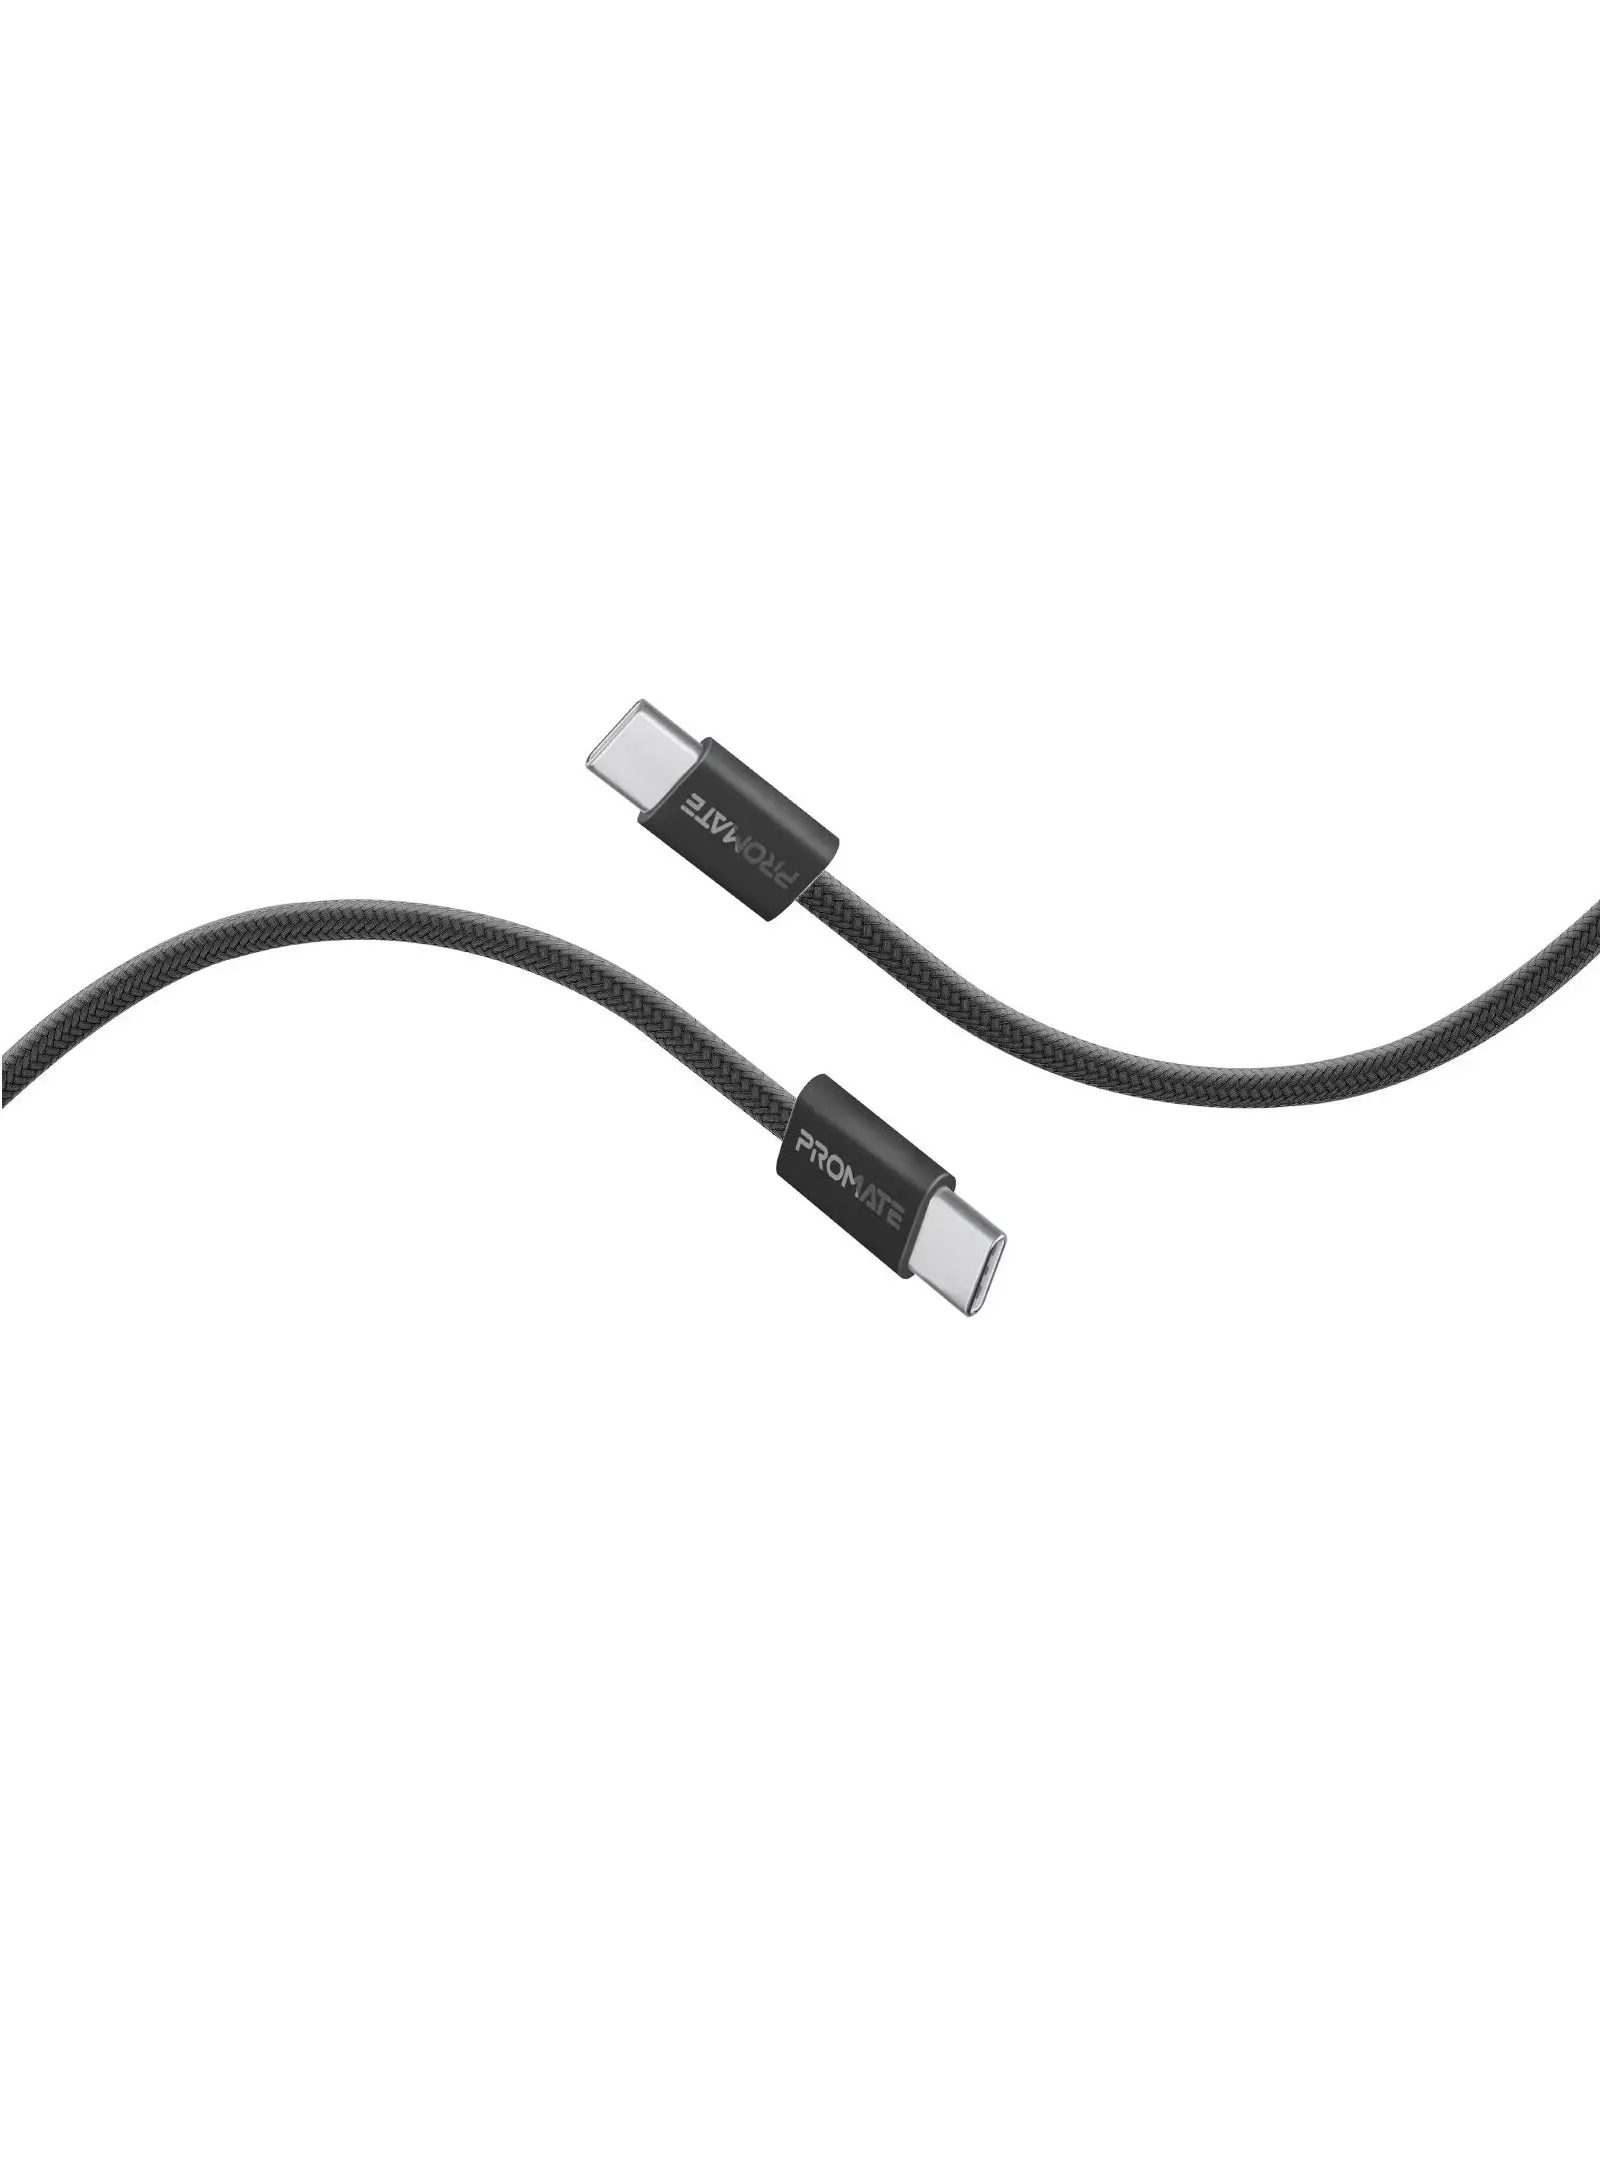 PROMATE USB-C Charging Cable, Powerful Sync Charge Type-C Cable with 60W Fast Power Delivery, 480Mbps Data Transfer and 120cm Tangle-Free Nylon Braided Cord, EcoLine-CC120 Black